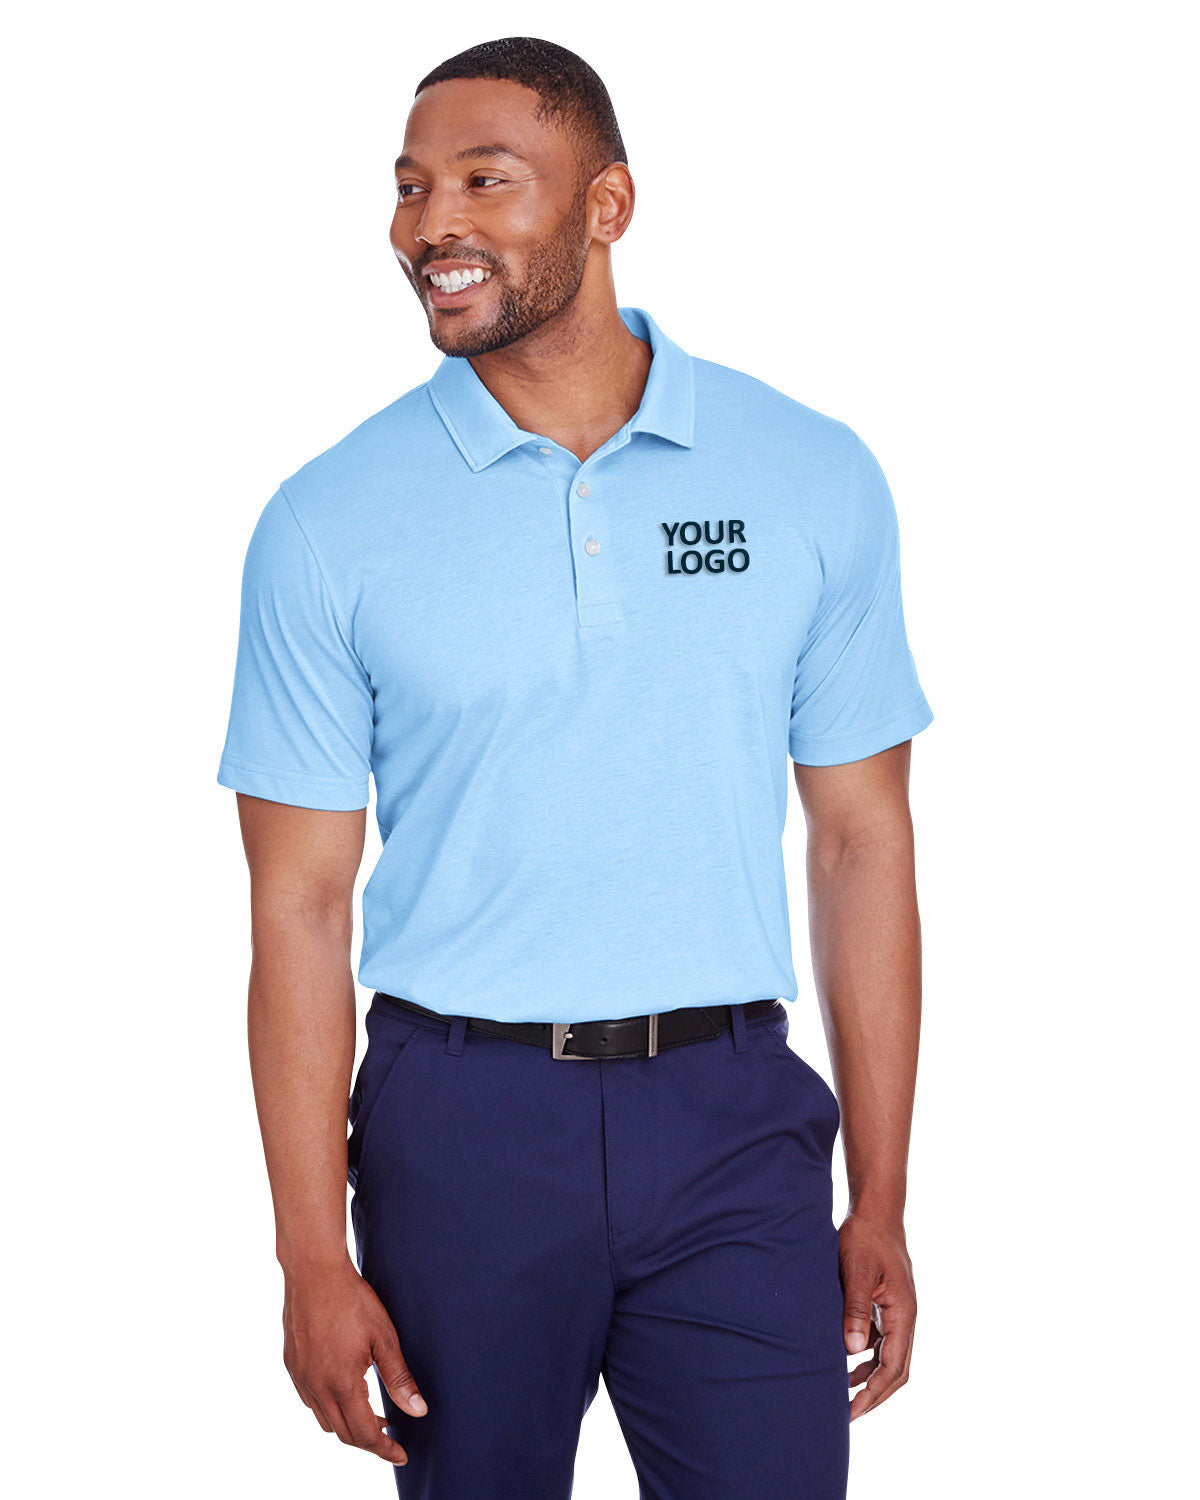 Puma Blue Bell 596920 polo shirts with logos